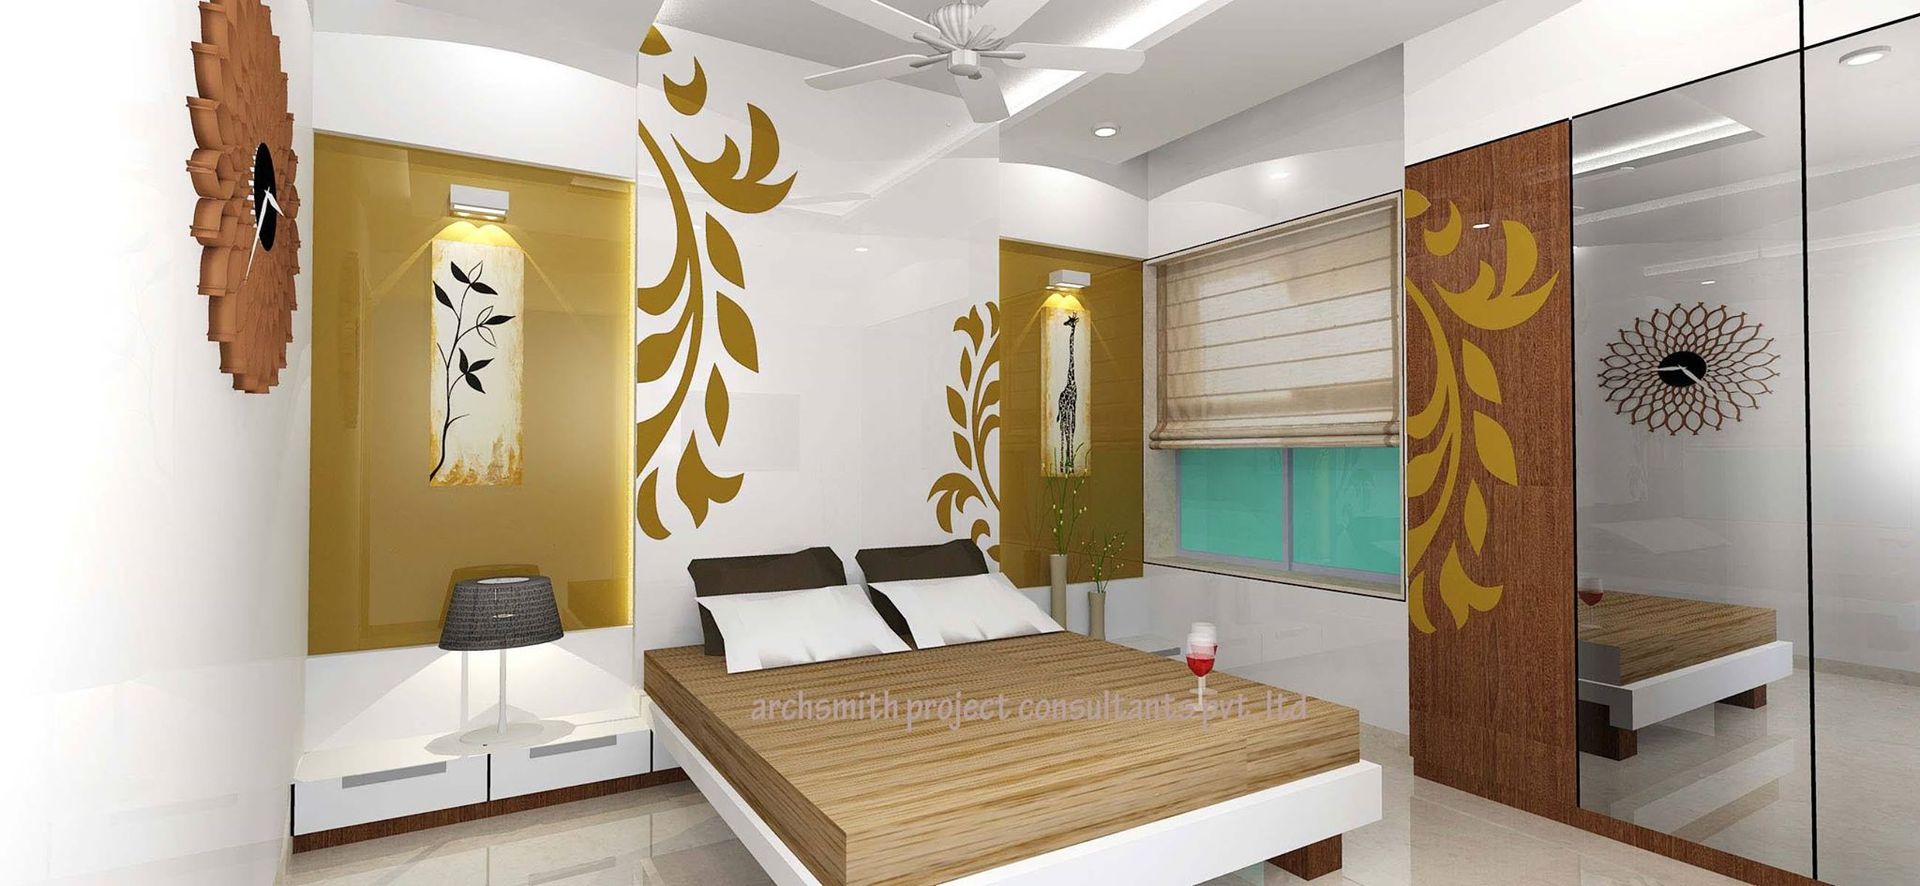 Bedroom Designs, Archsmith project consultant Archsmith project consultant Quartos modernos